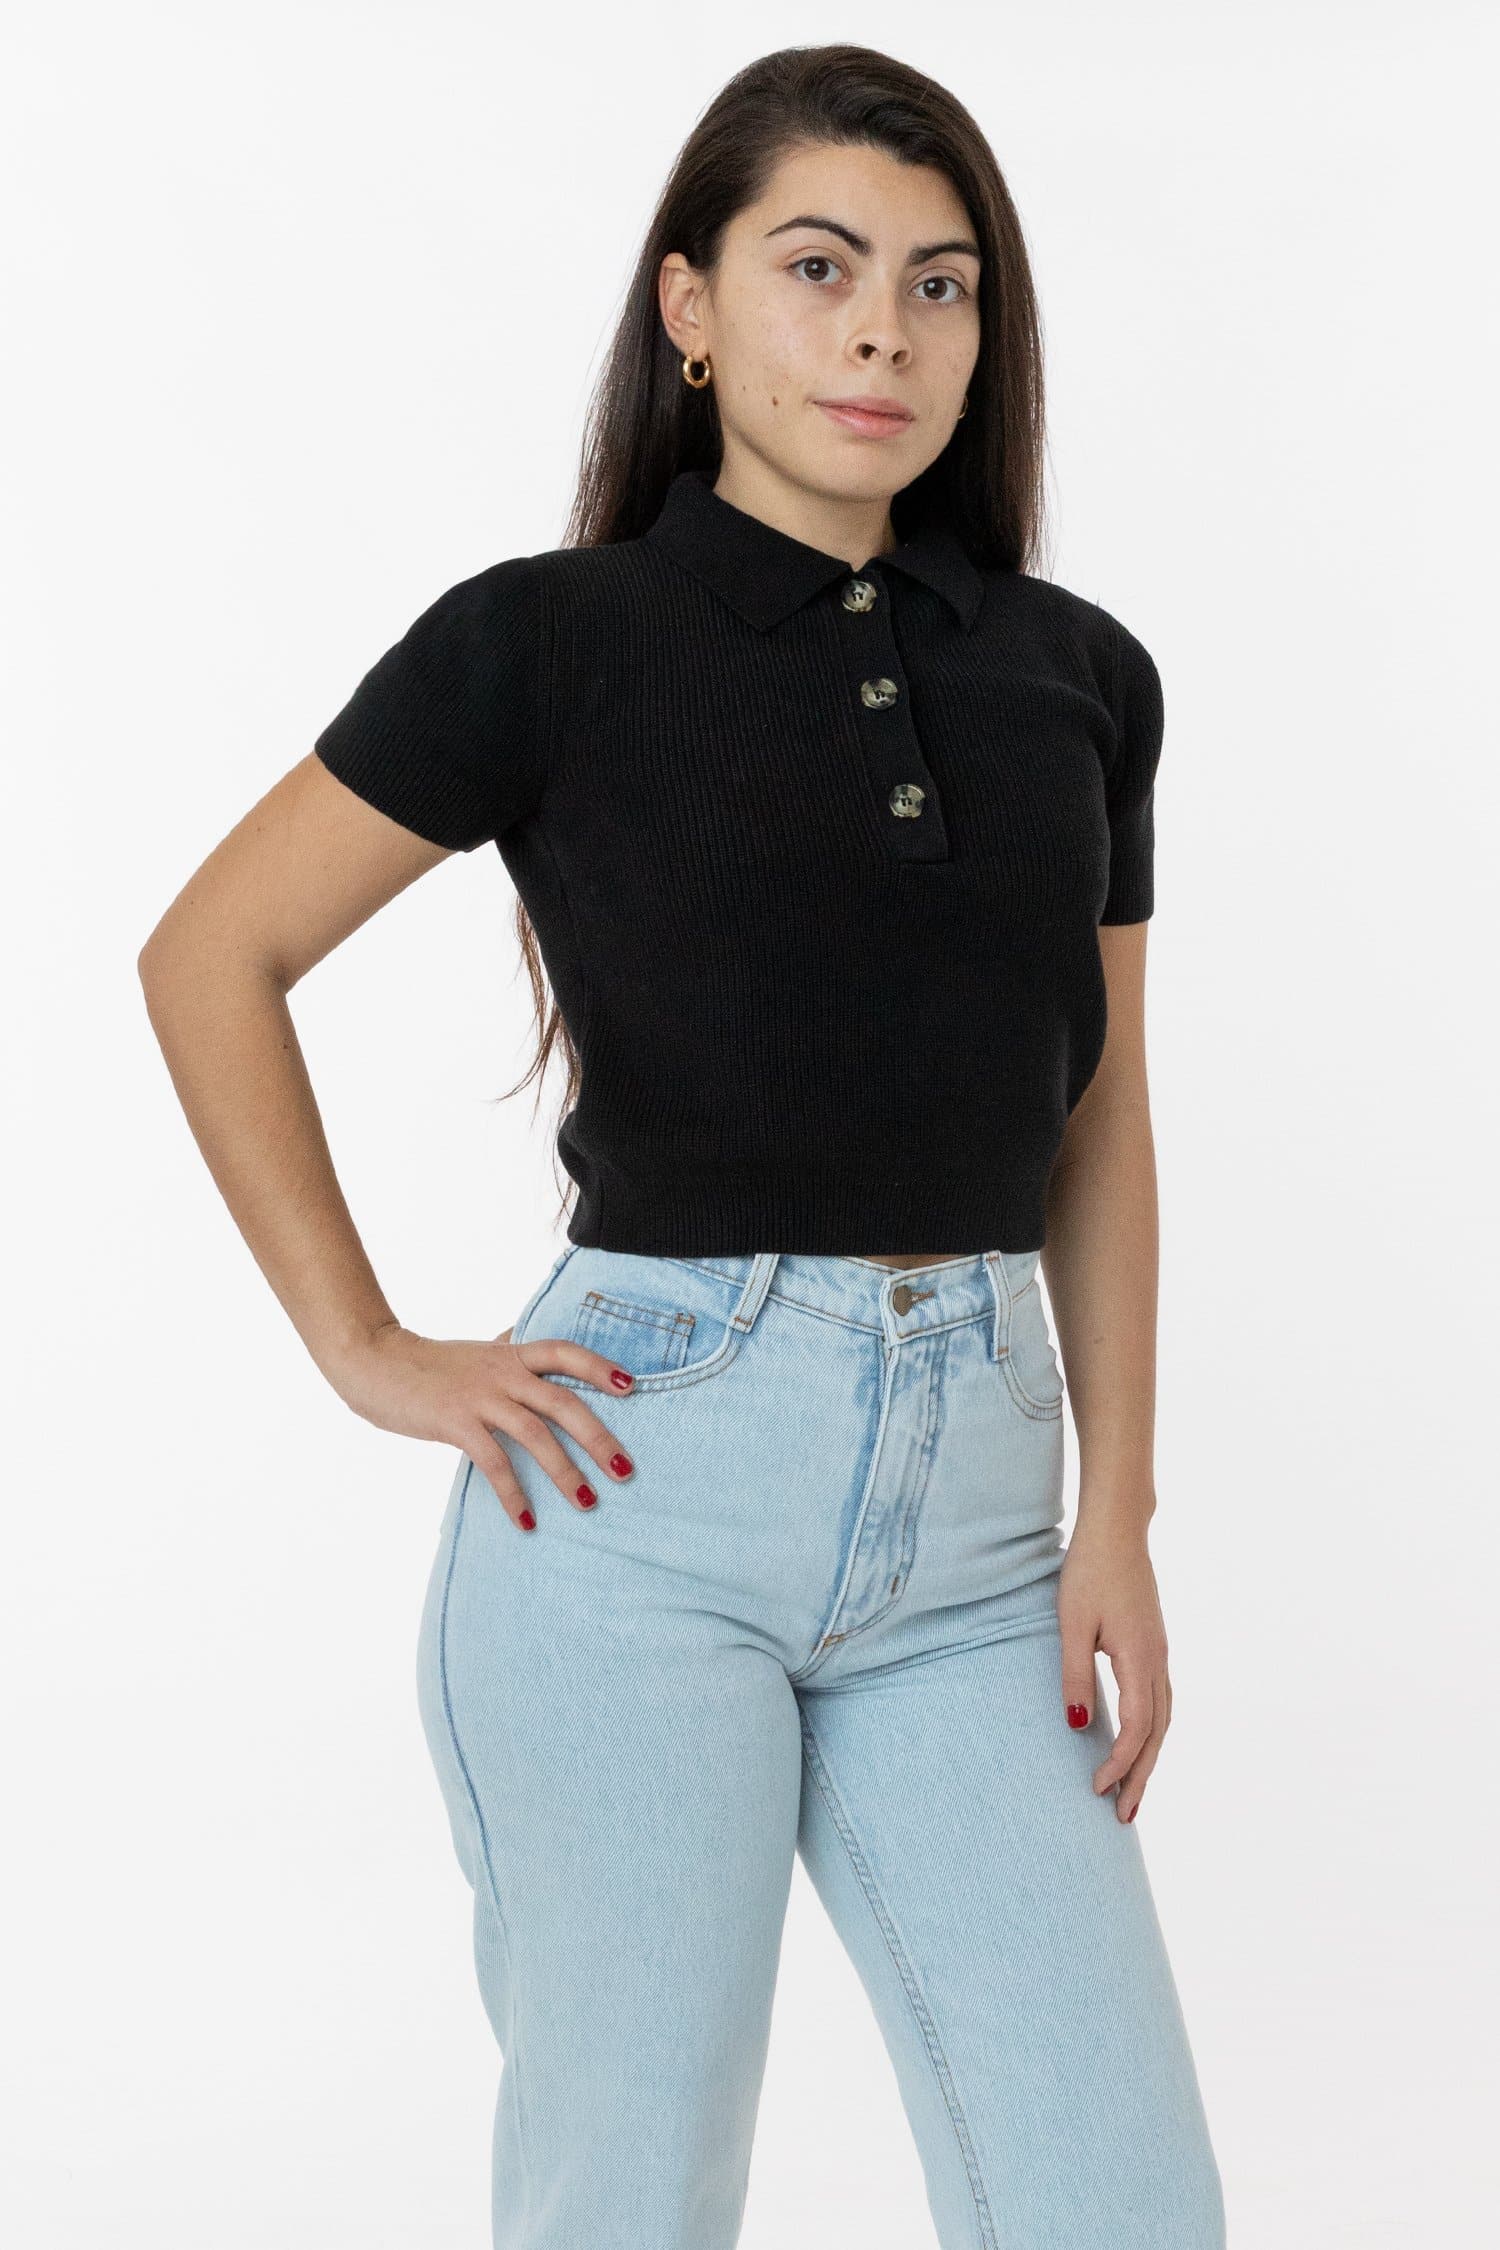 RFK46GD - Cotton Short Sleeve Cropped Polo Sweater